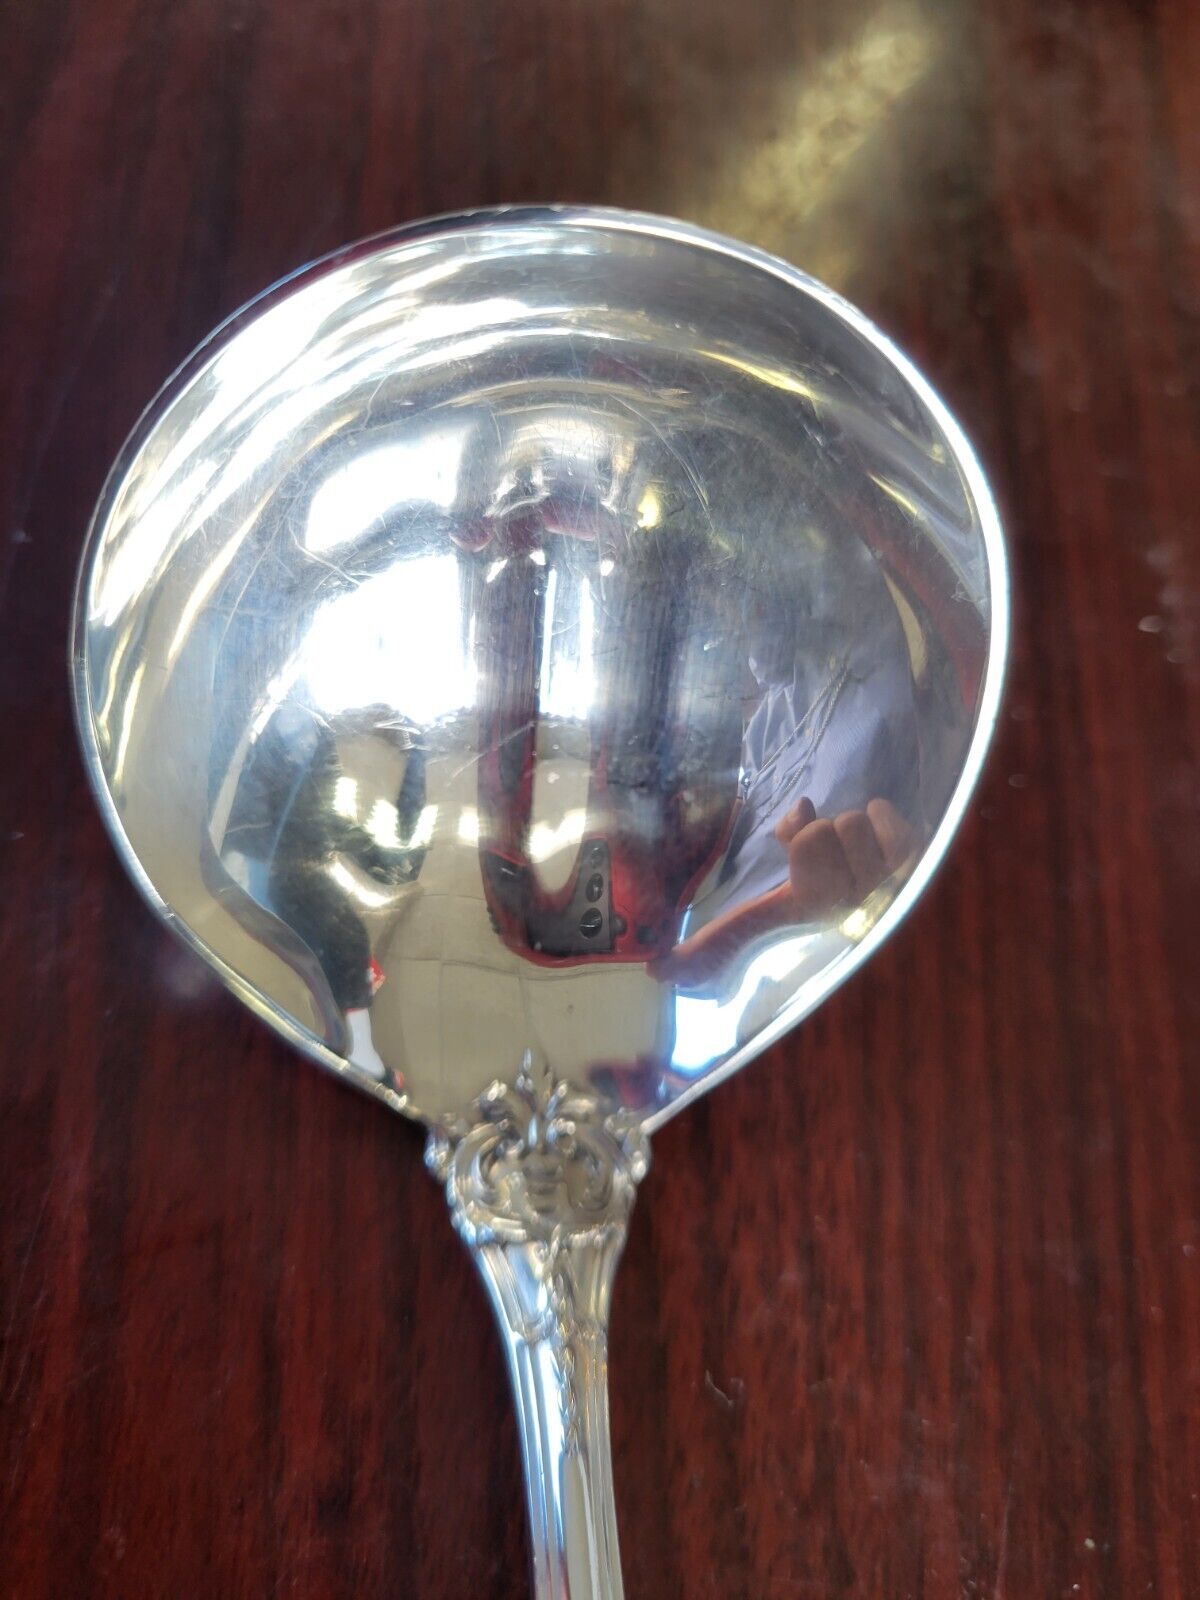 Francis I by Reed & Barton Sterling Silver 6-1/2" Gravy Ladle 2.2oz.